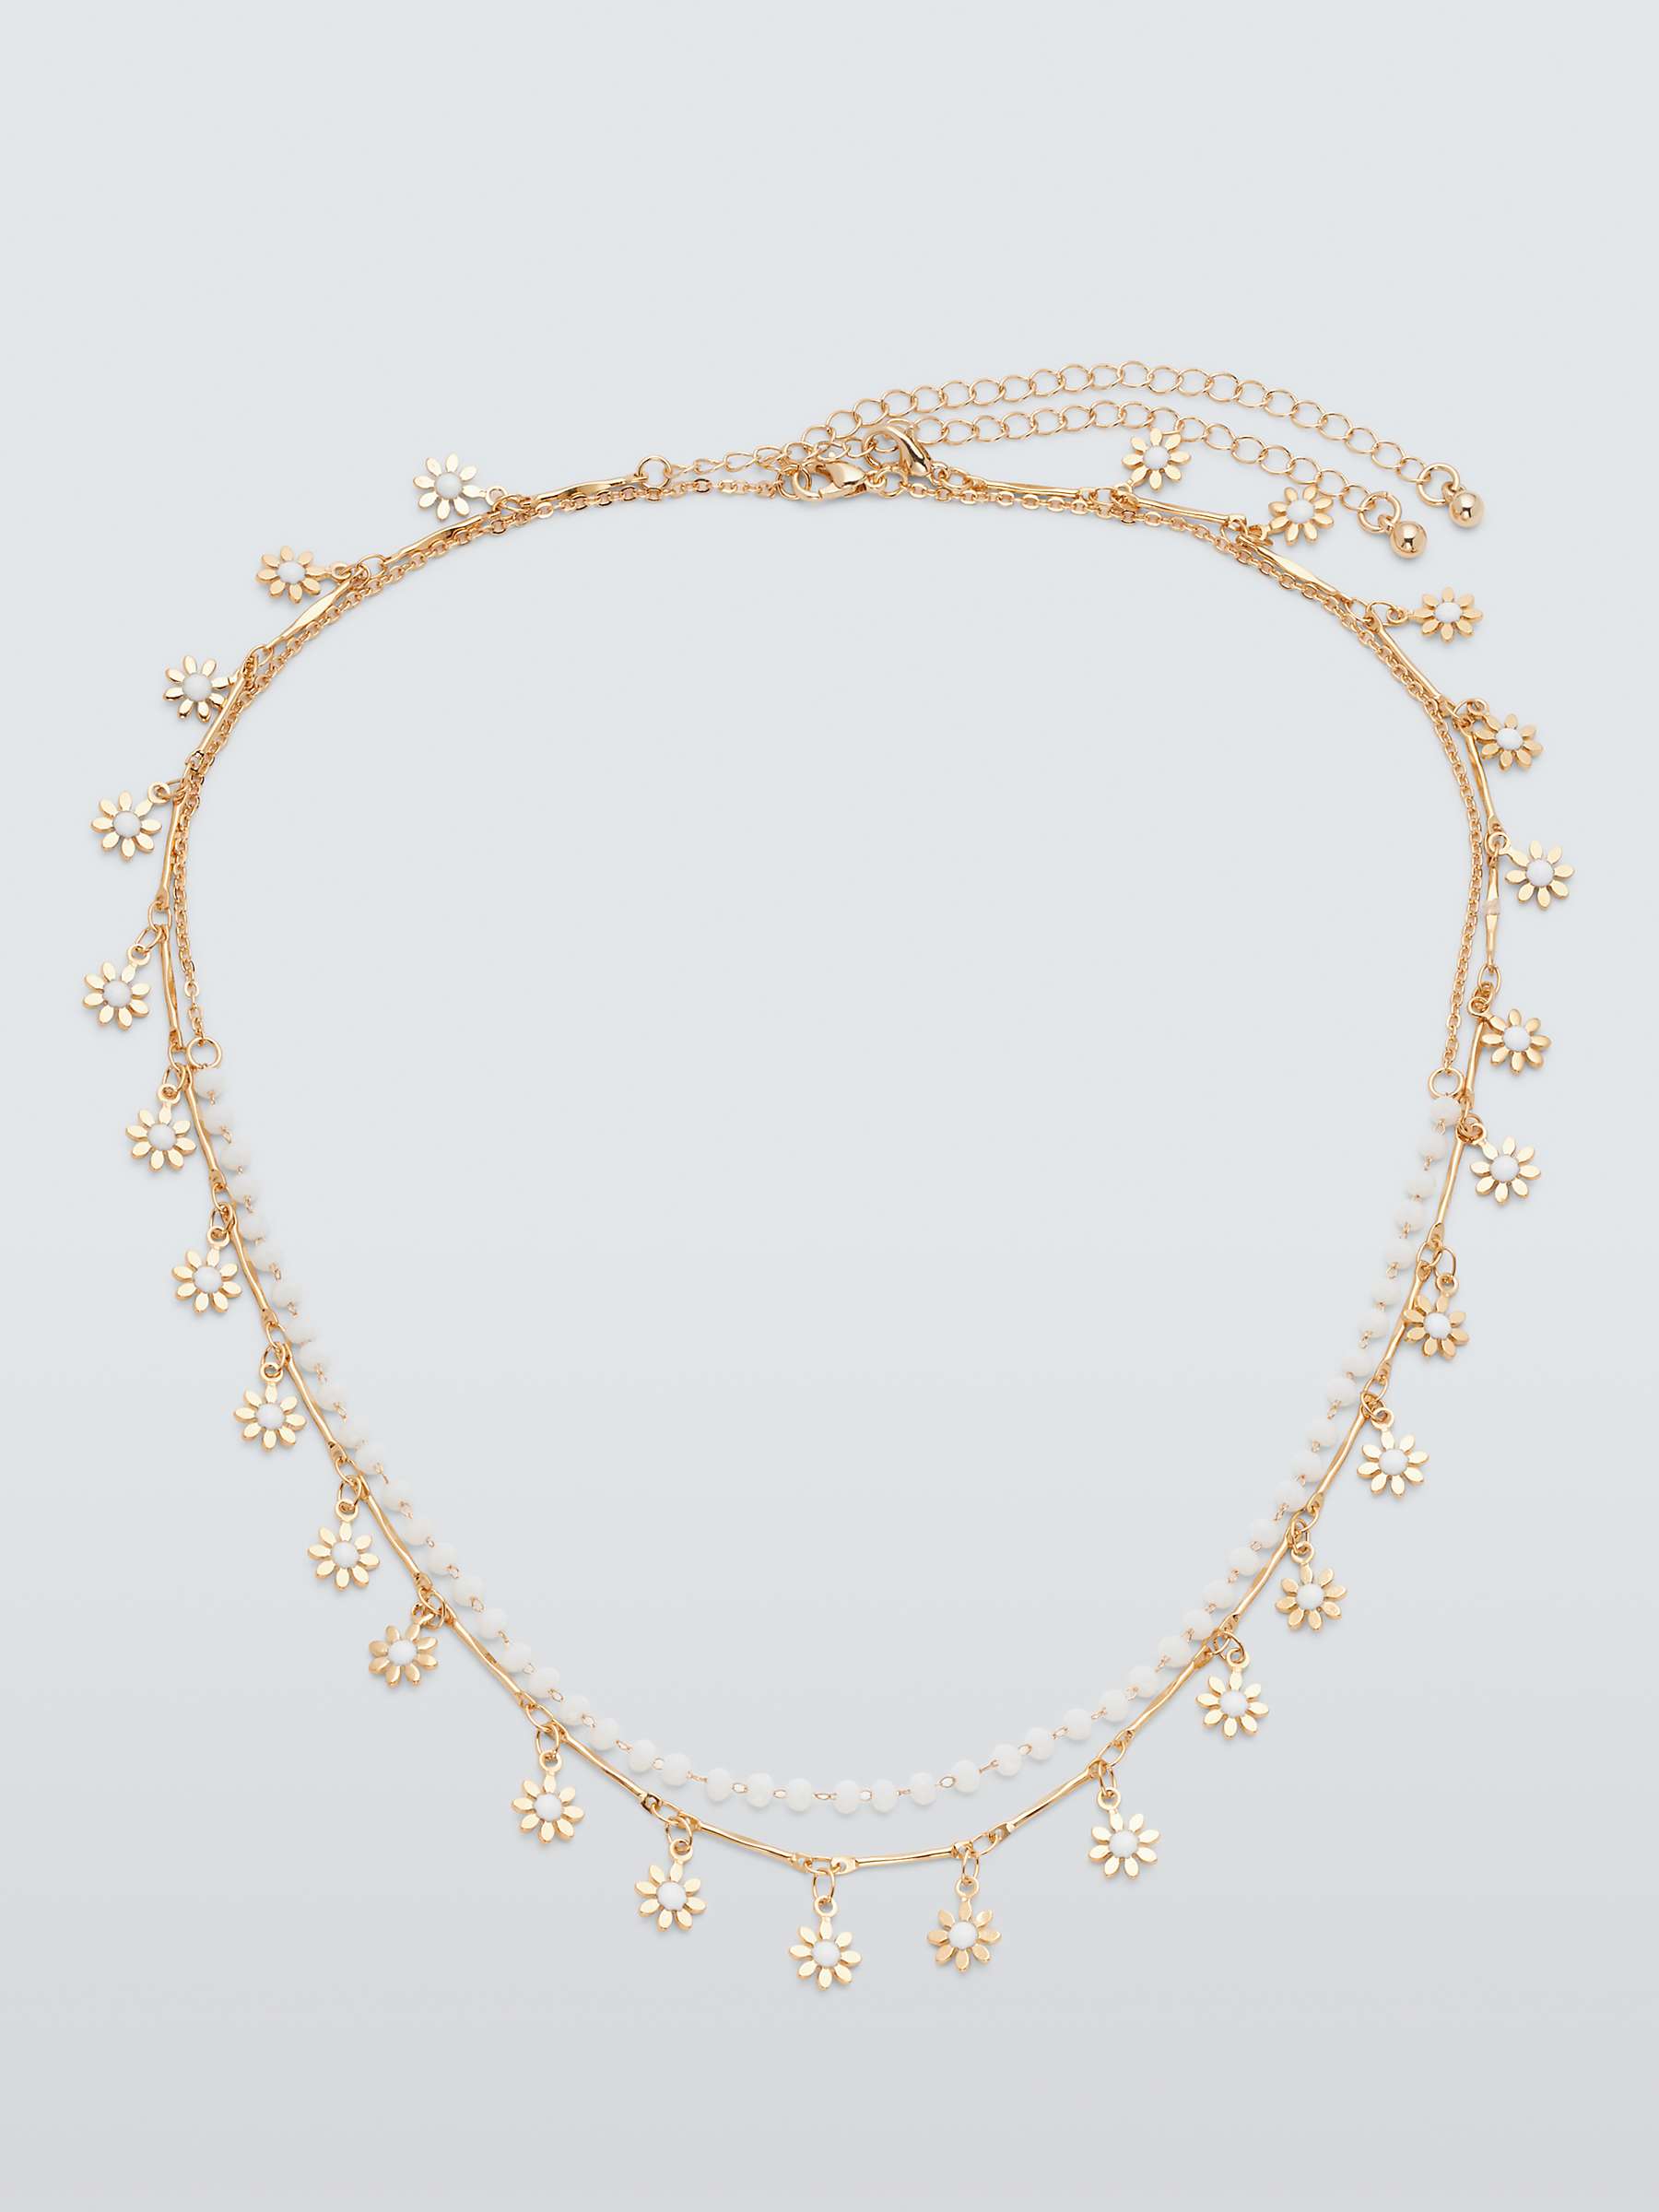 Buy John Lewis Daisy Drop Beaded Necklace, Pack of 2, Gold Online at johnlewis.com